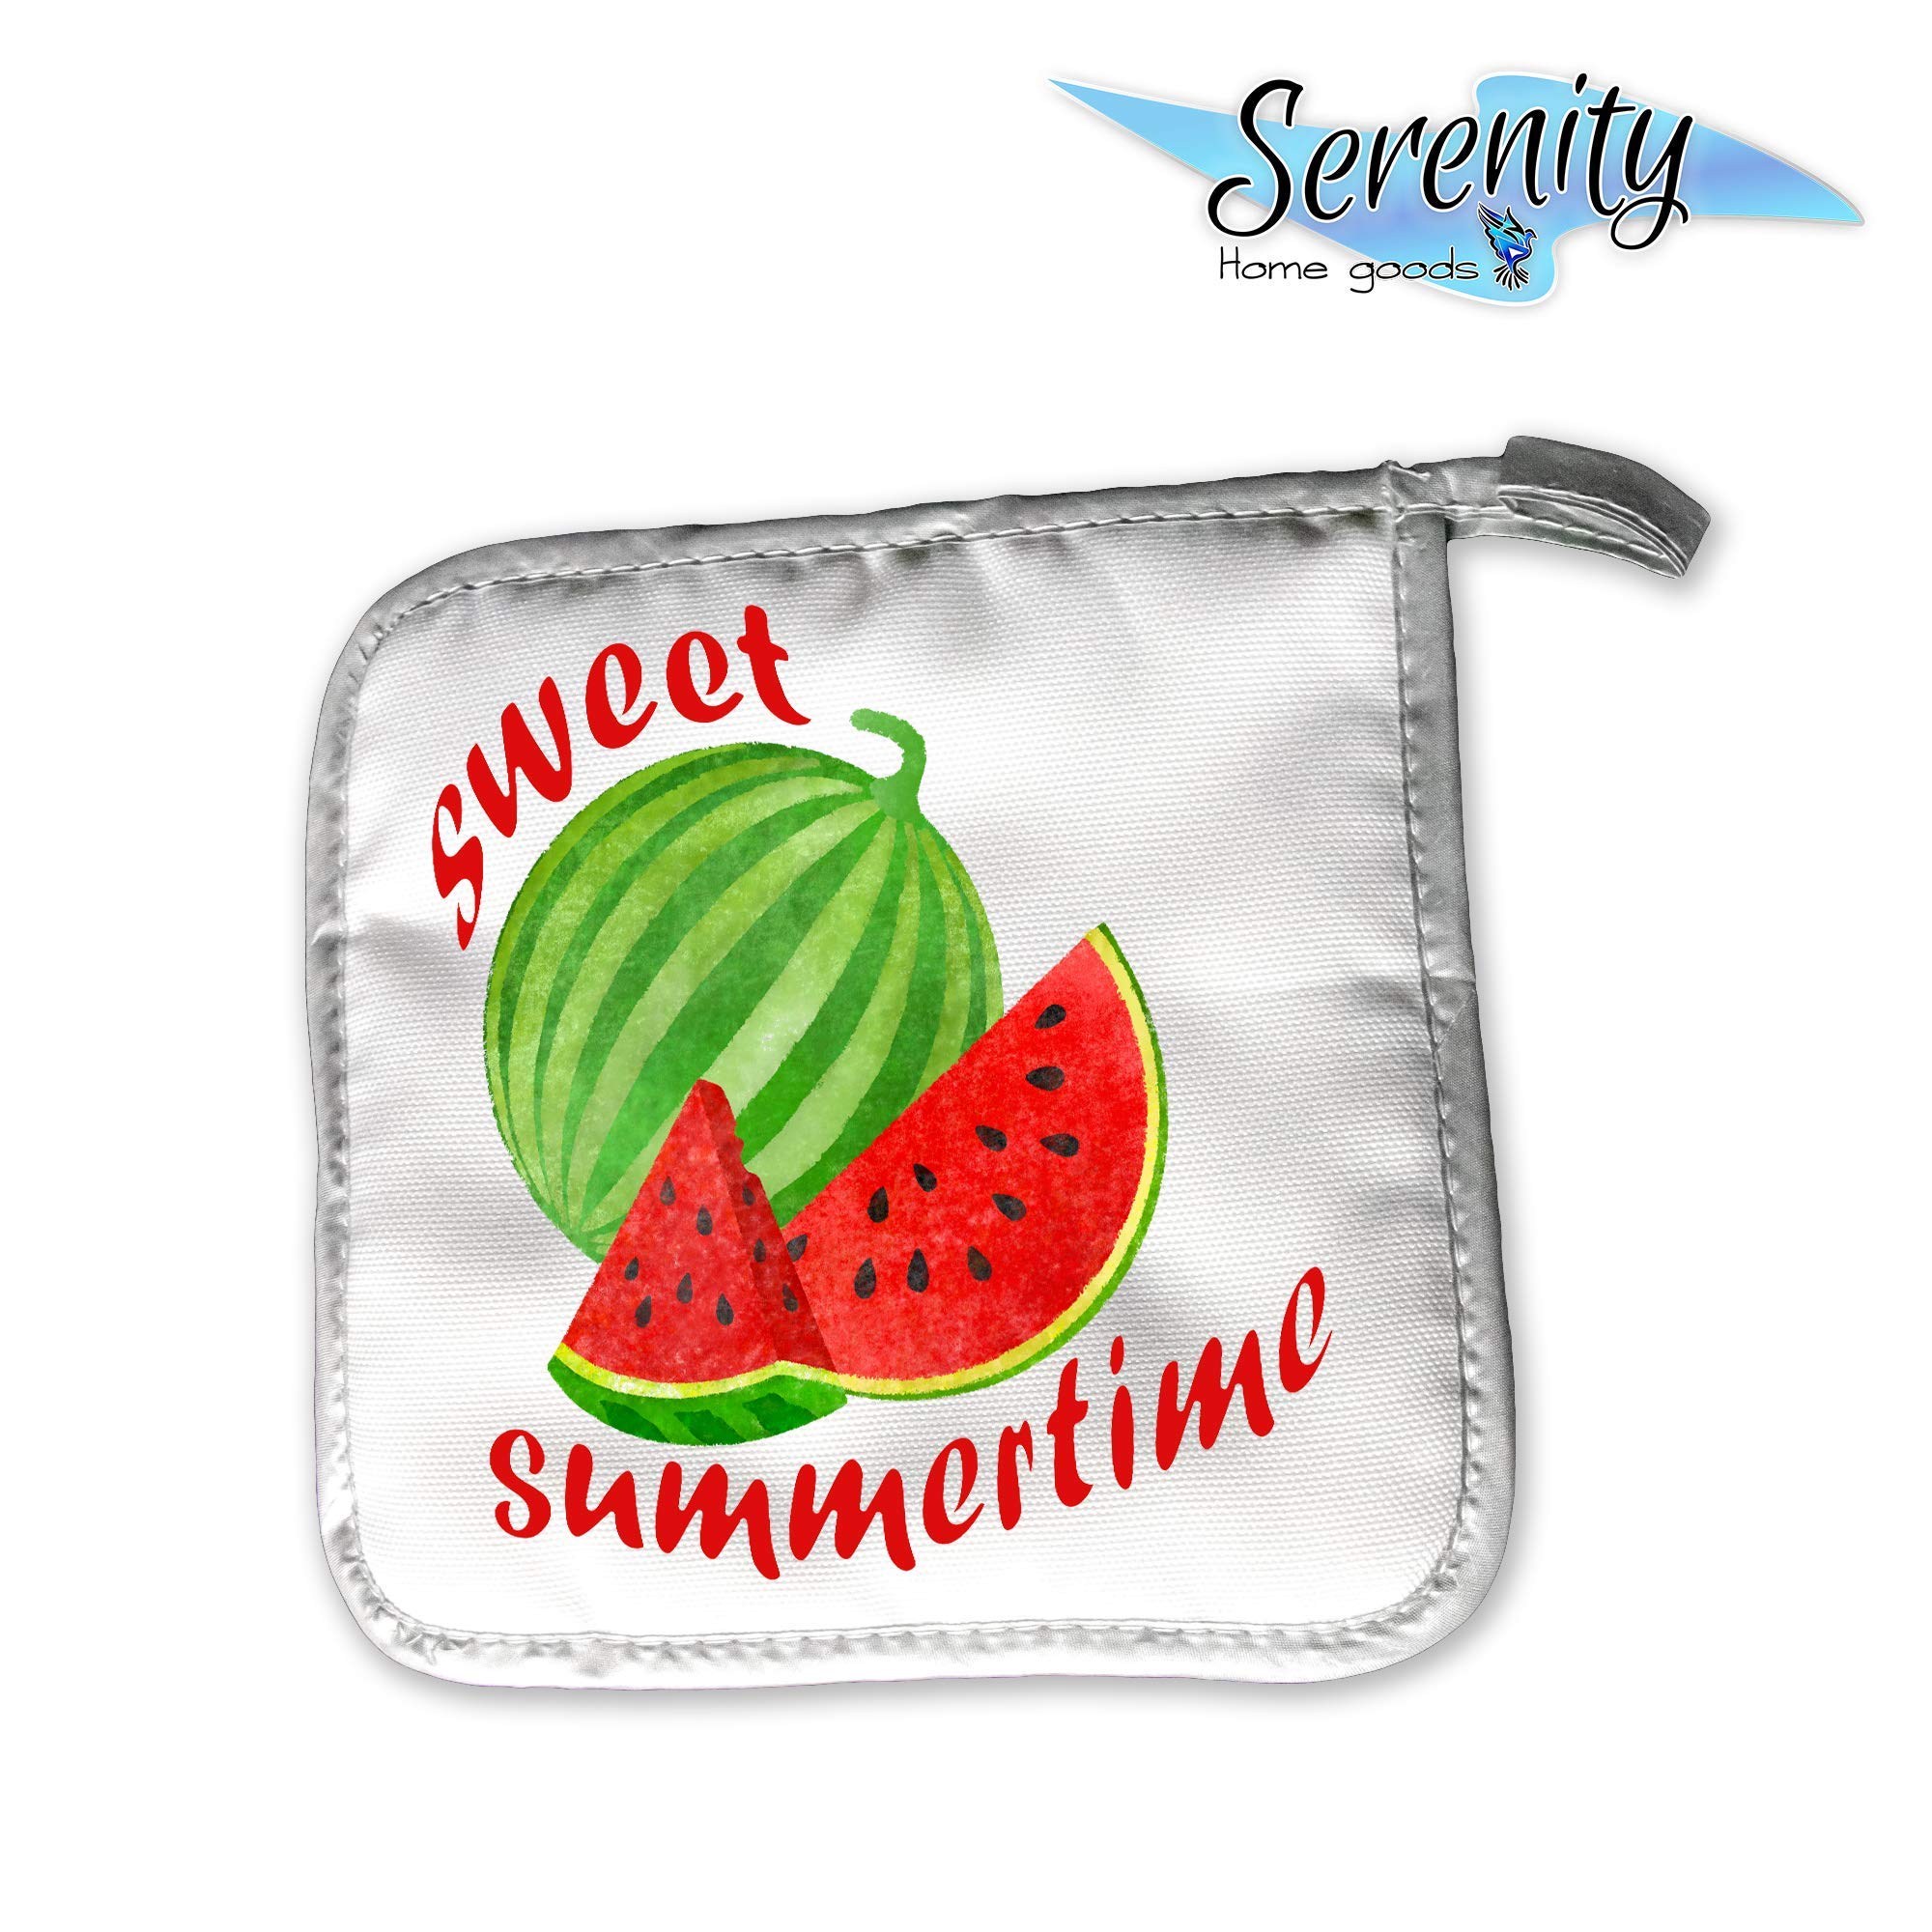 Summer Home Decor | Decorative Kitchen Oven Mitt Hot Plate Pot Holders | Sweet Summertime Watermelon Red Green | White Stove Home Decor Holiday Decorations | Mothers Day Gift Present